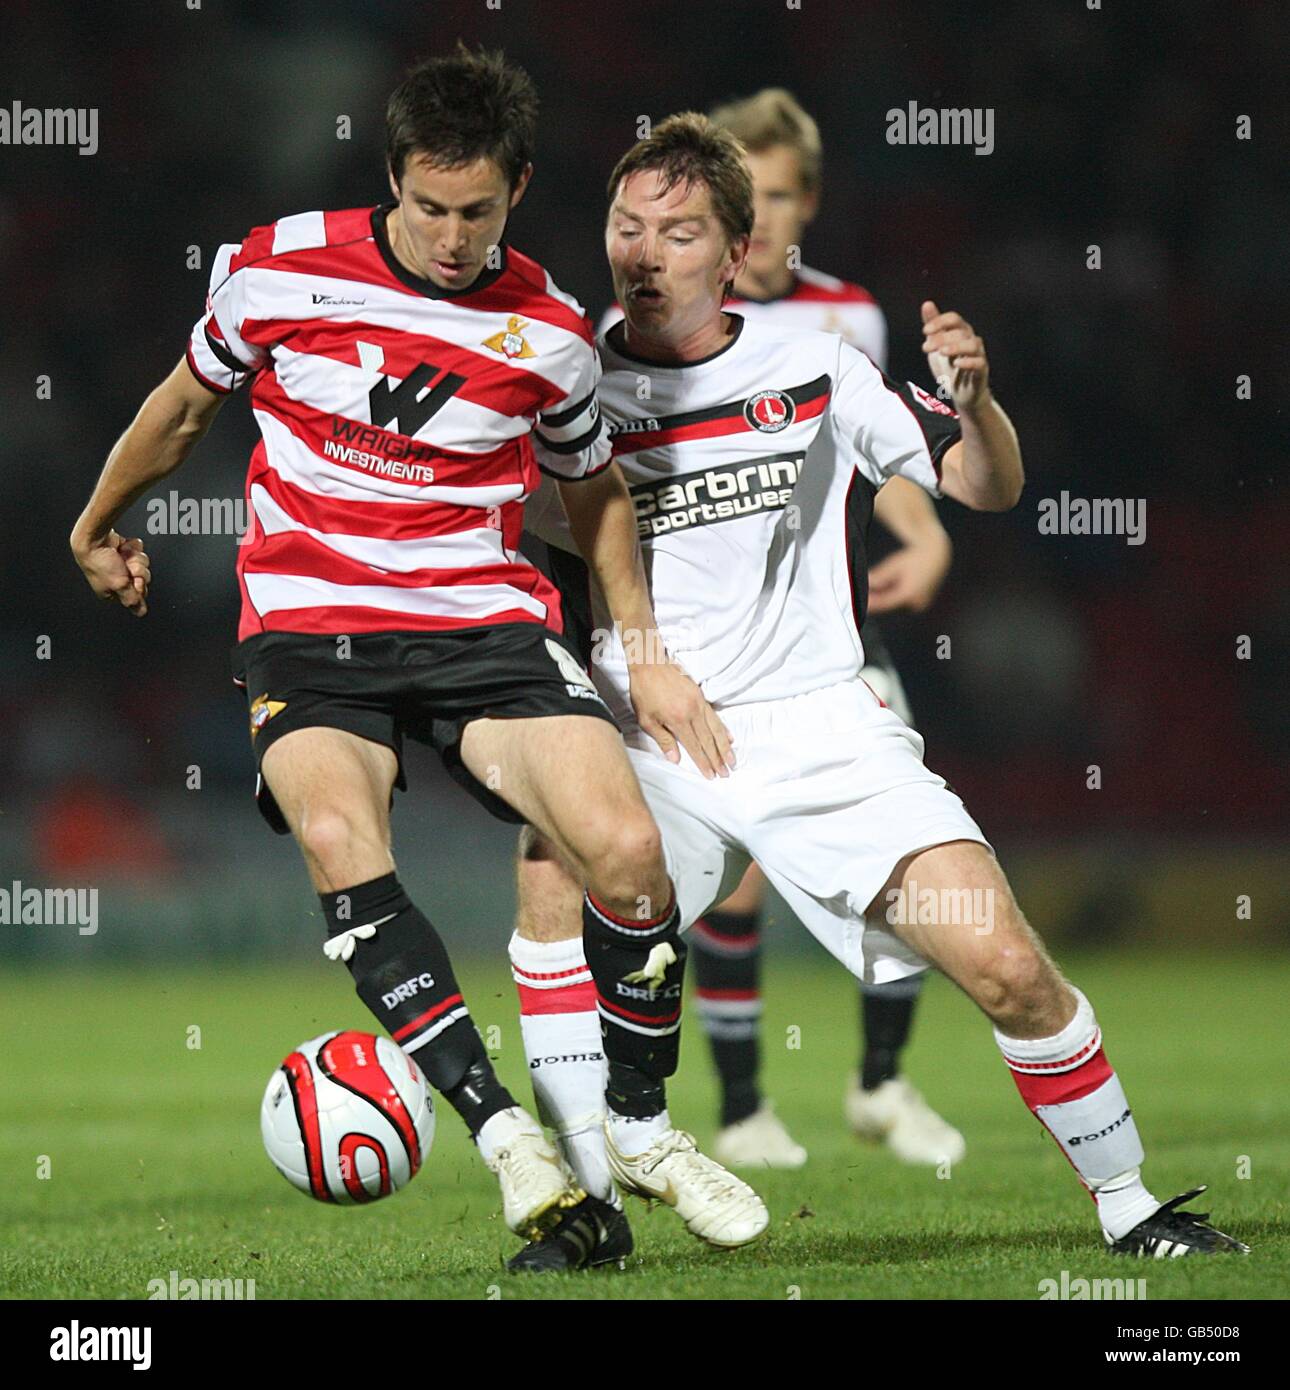 Soccer - Coca-Cola Football League Championship - Doncaster Rovers v Charlton Athletic - Keepmoat Stadium. Charlton Athletic's Matthew Holland (r) and Doncaster Rovers' Brian Stock battle for the ball Stock Photo